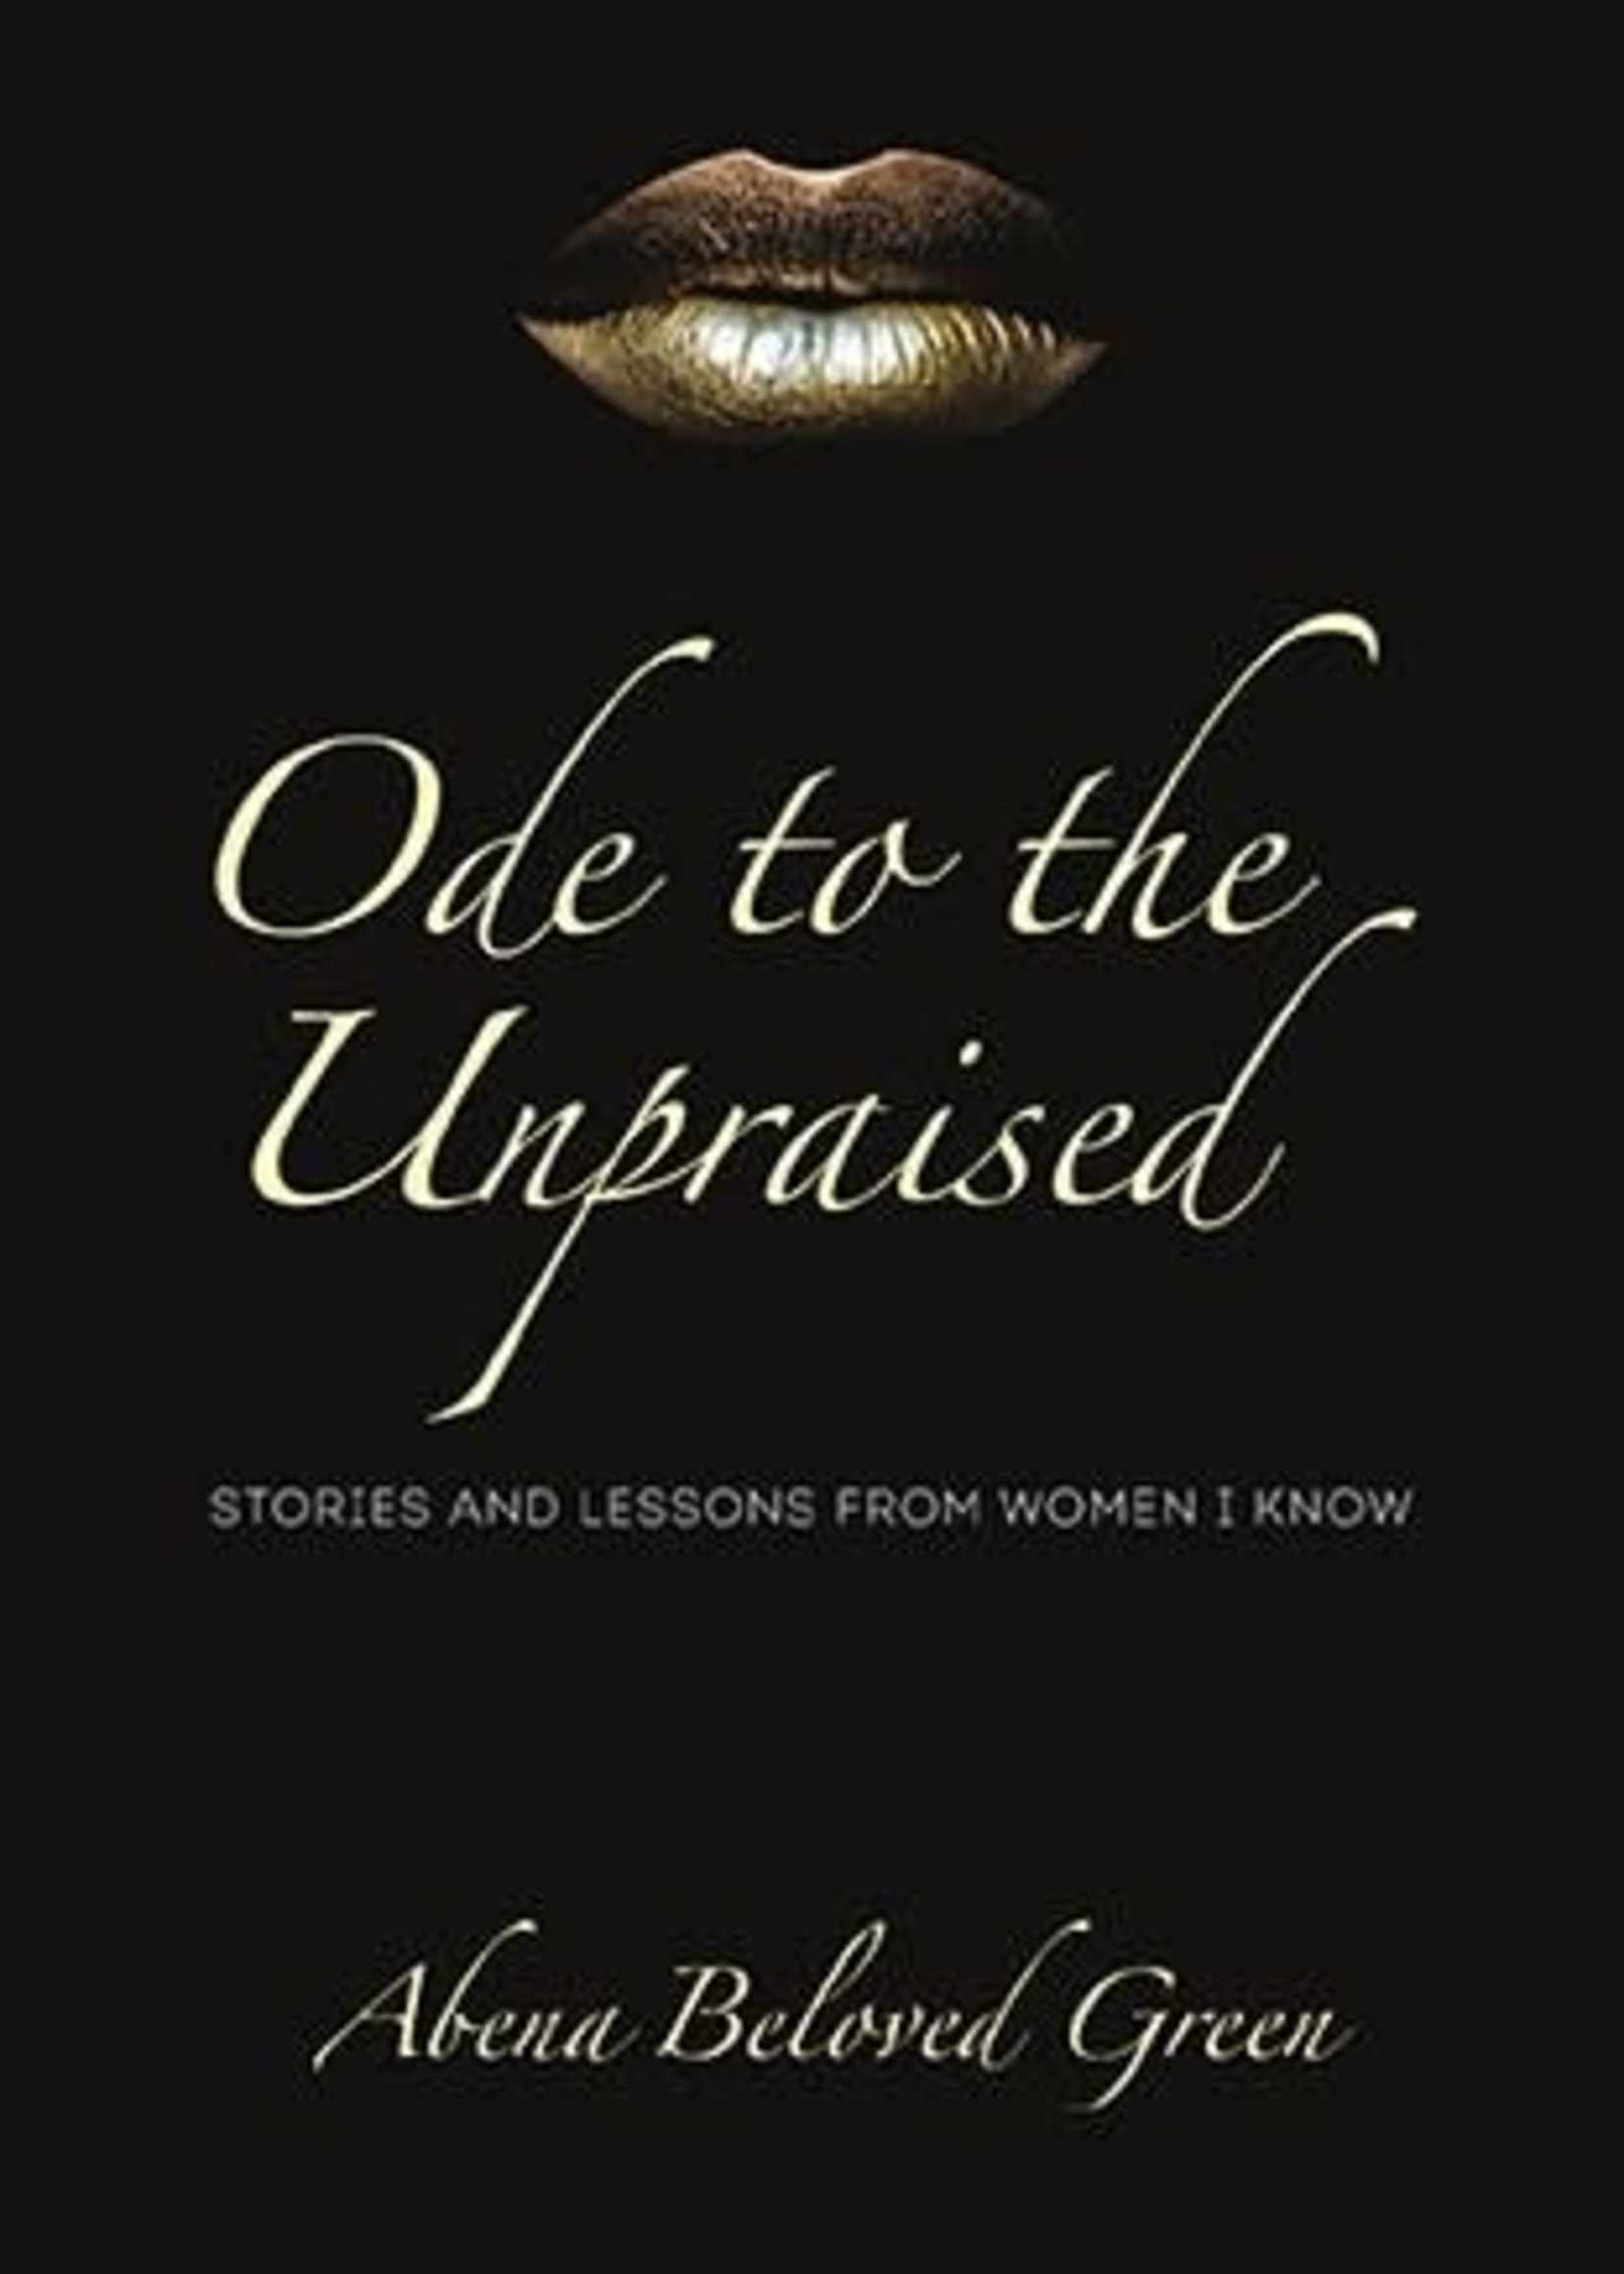 Ode to the Unpraised: Stories and Lessons from Women I Know by Abena Beloved Green